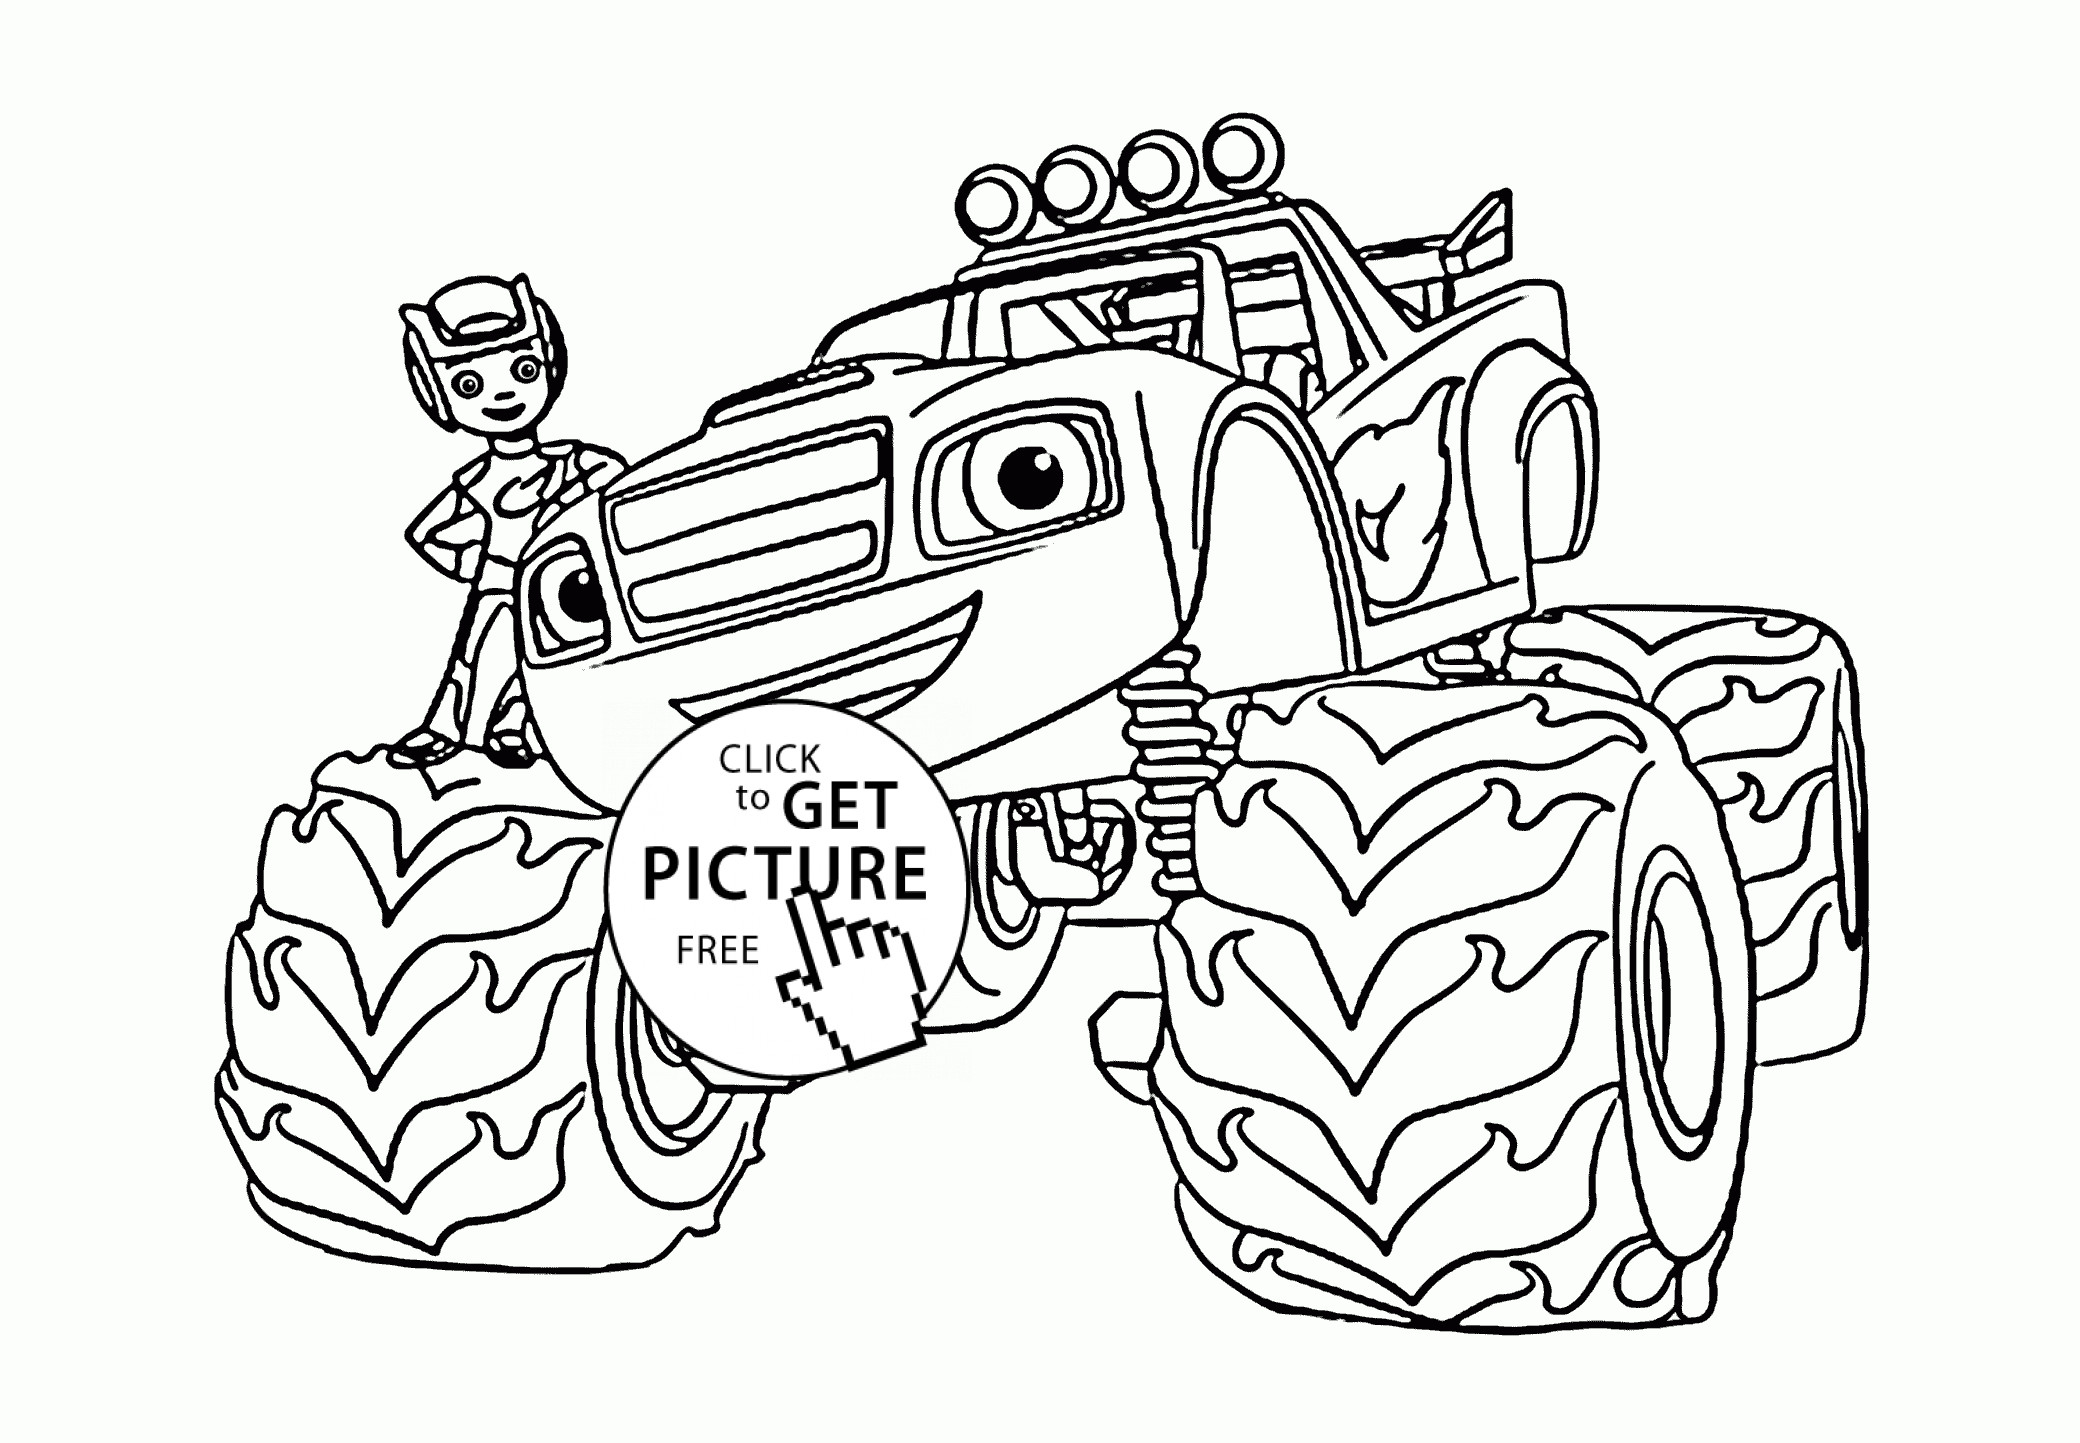 Coloring Pages Boys Monster Truck
 Blaze Monster Truck with Boy coloring page for kids